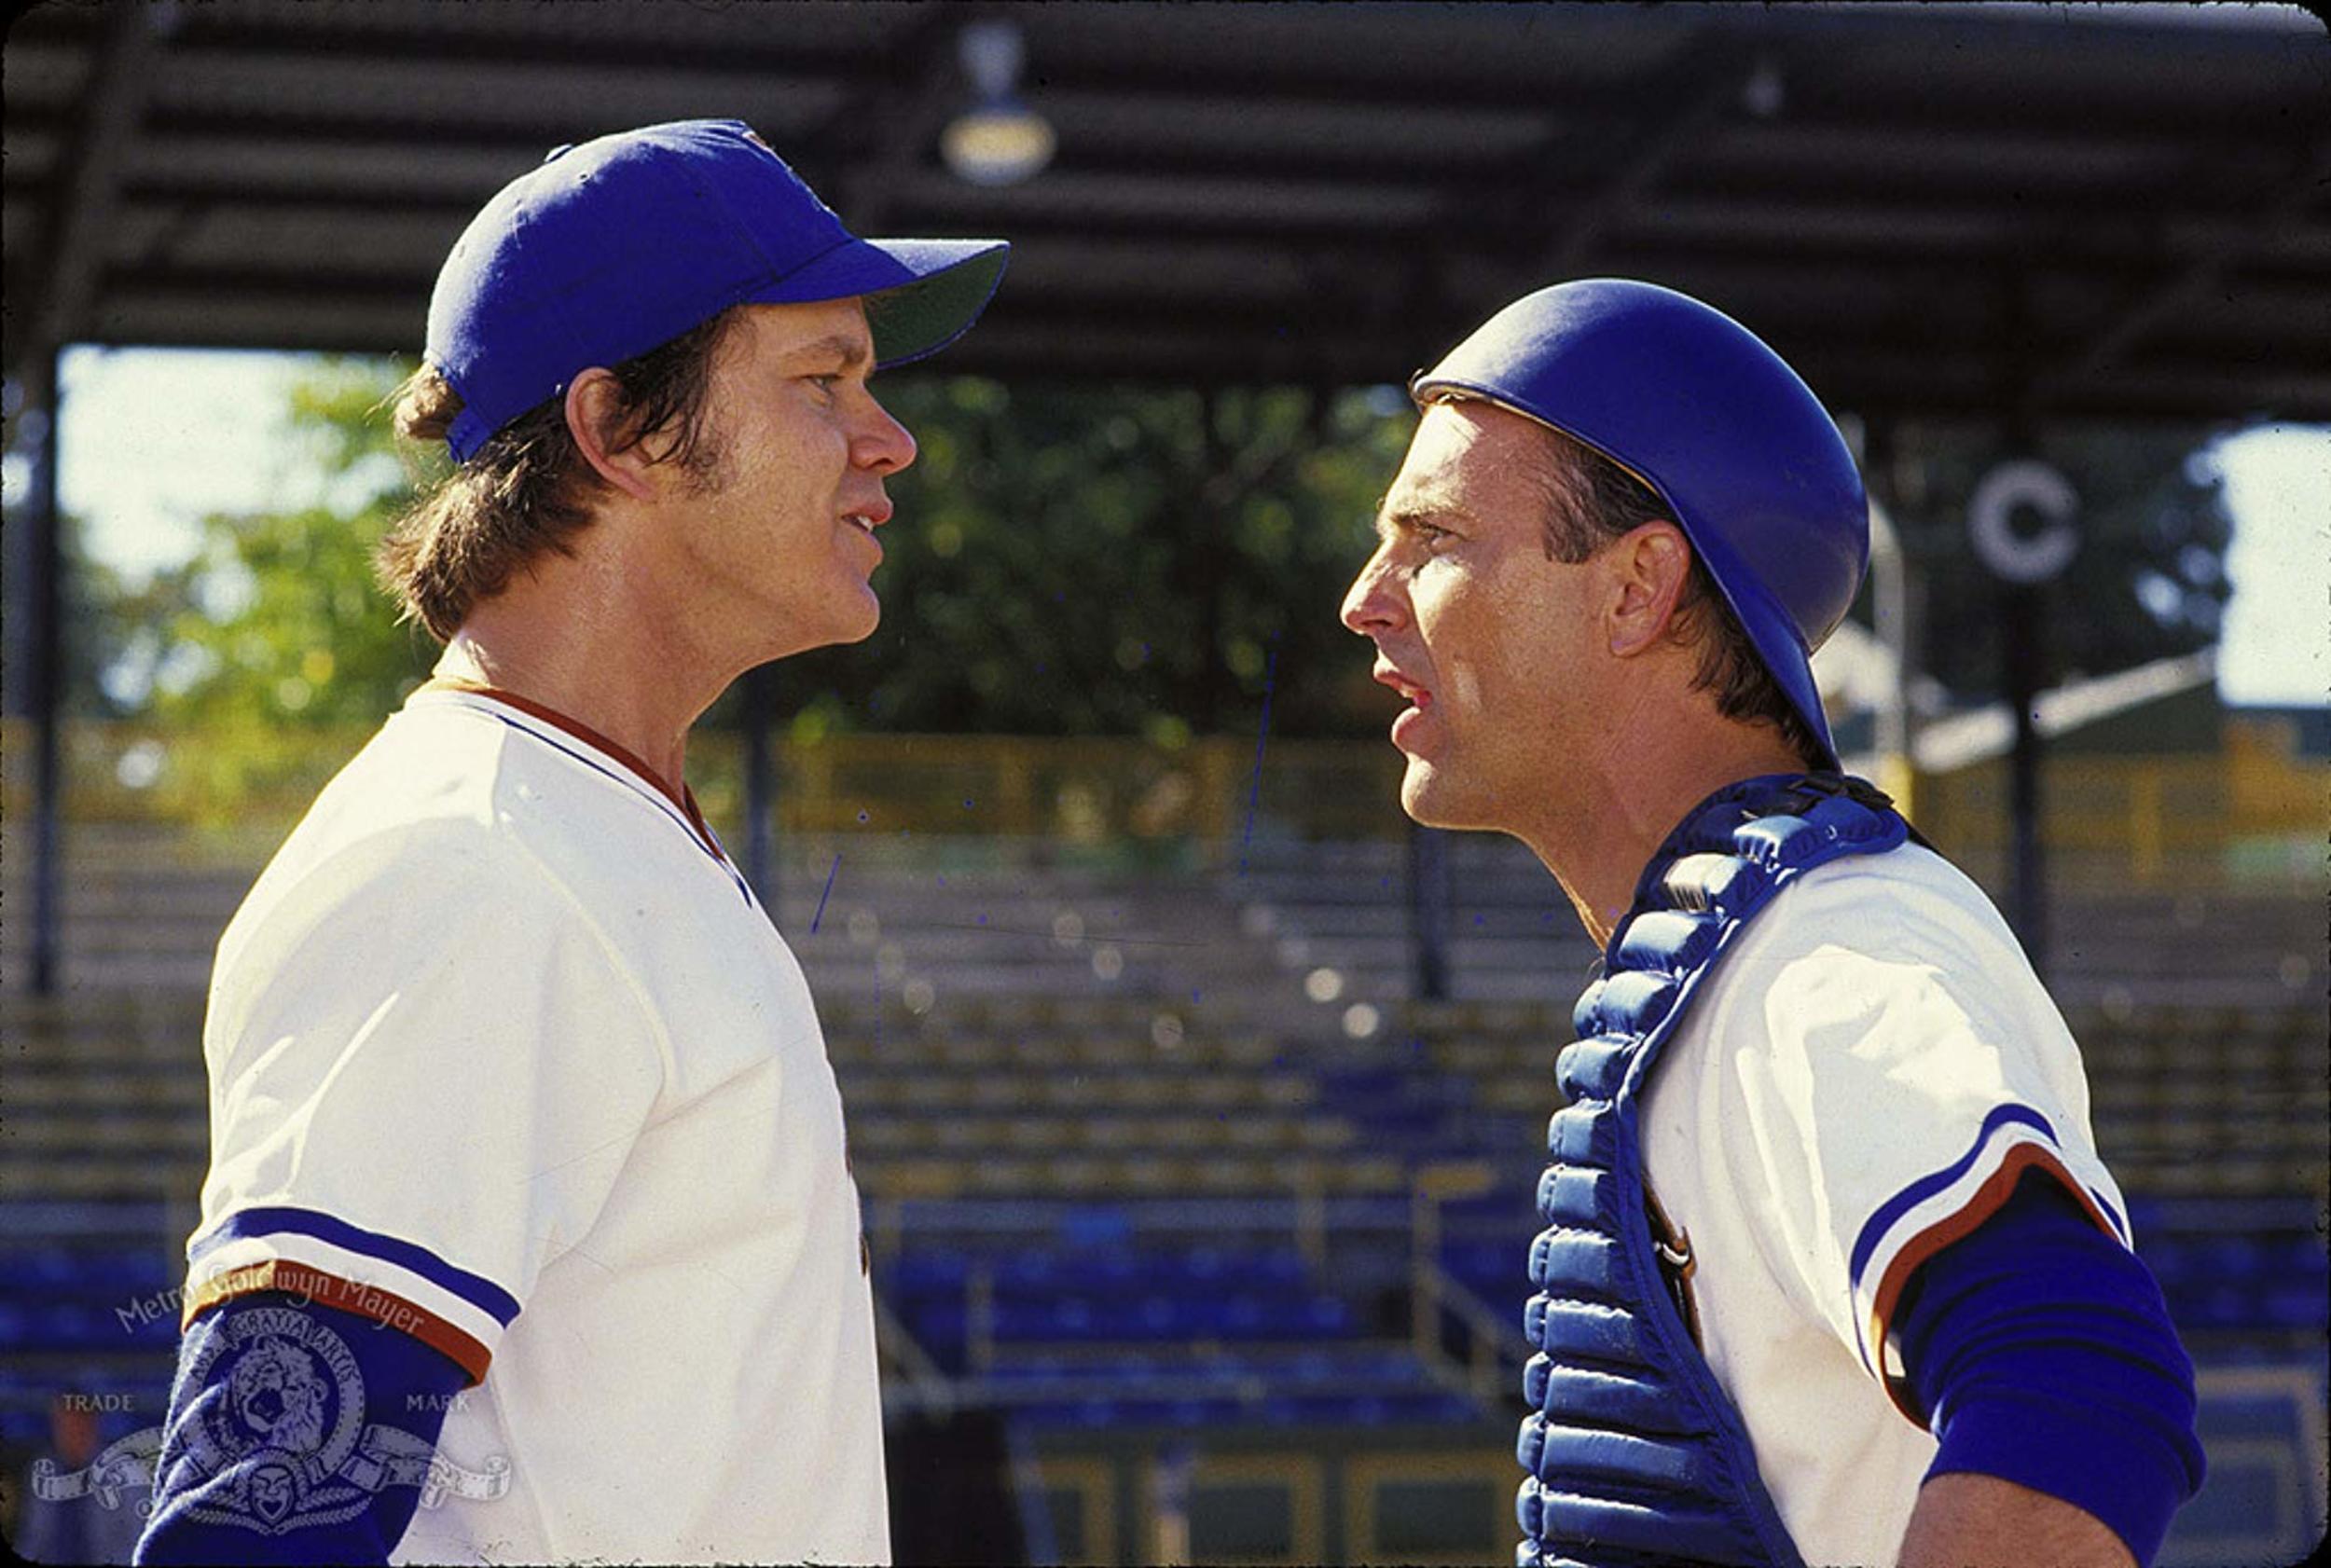 <p>Kevin Costner seems to love baseball. Of all his baseball films, though “Bull Durham” is the best. We can credit the cast for that. This is a sports movie that features Costner, Susan Sarandon and Tim Robbins in prominent roles. Plus, sometimes a career minor leaguer like Crash Davis is more interesting than any star.</p><p><a href='https://www.msn.com/en-us/community/channel/vid-cj9pqbr0vn9in2b6ddcd8sfgpfq6x6utp44fssrv6mc2gtybw0us'>Follow us on MSN to see more of our exclusive entertainment content.</a></p>